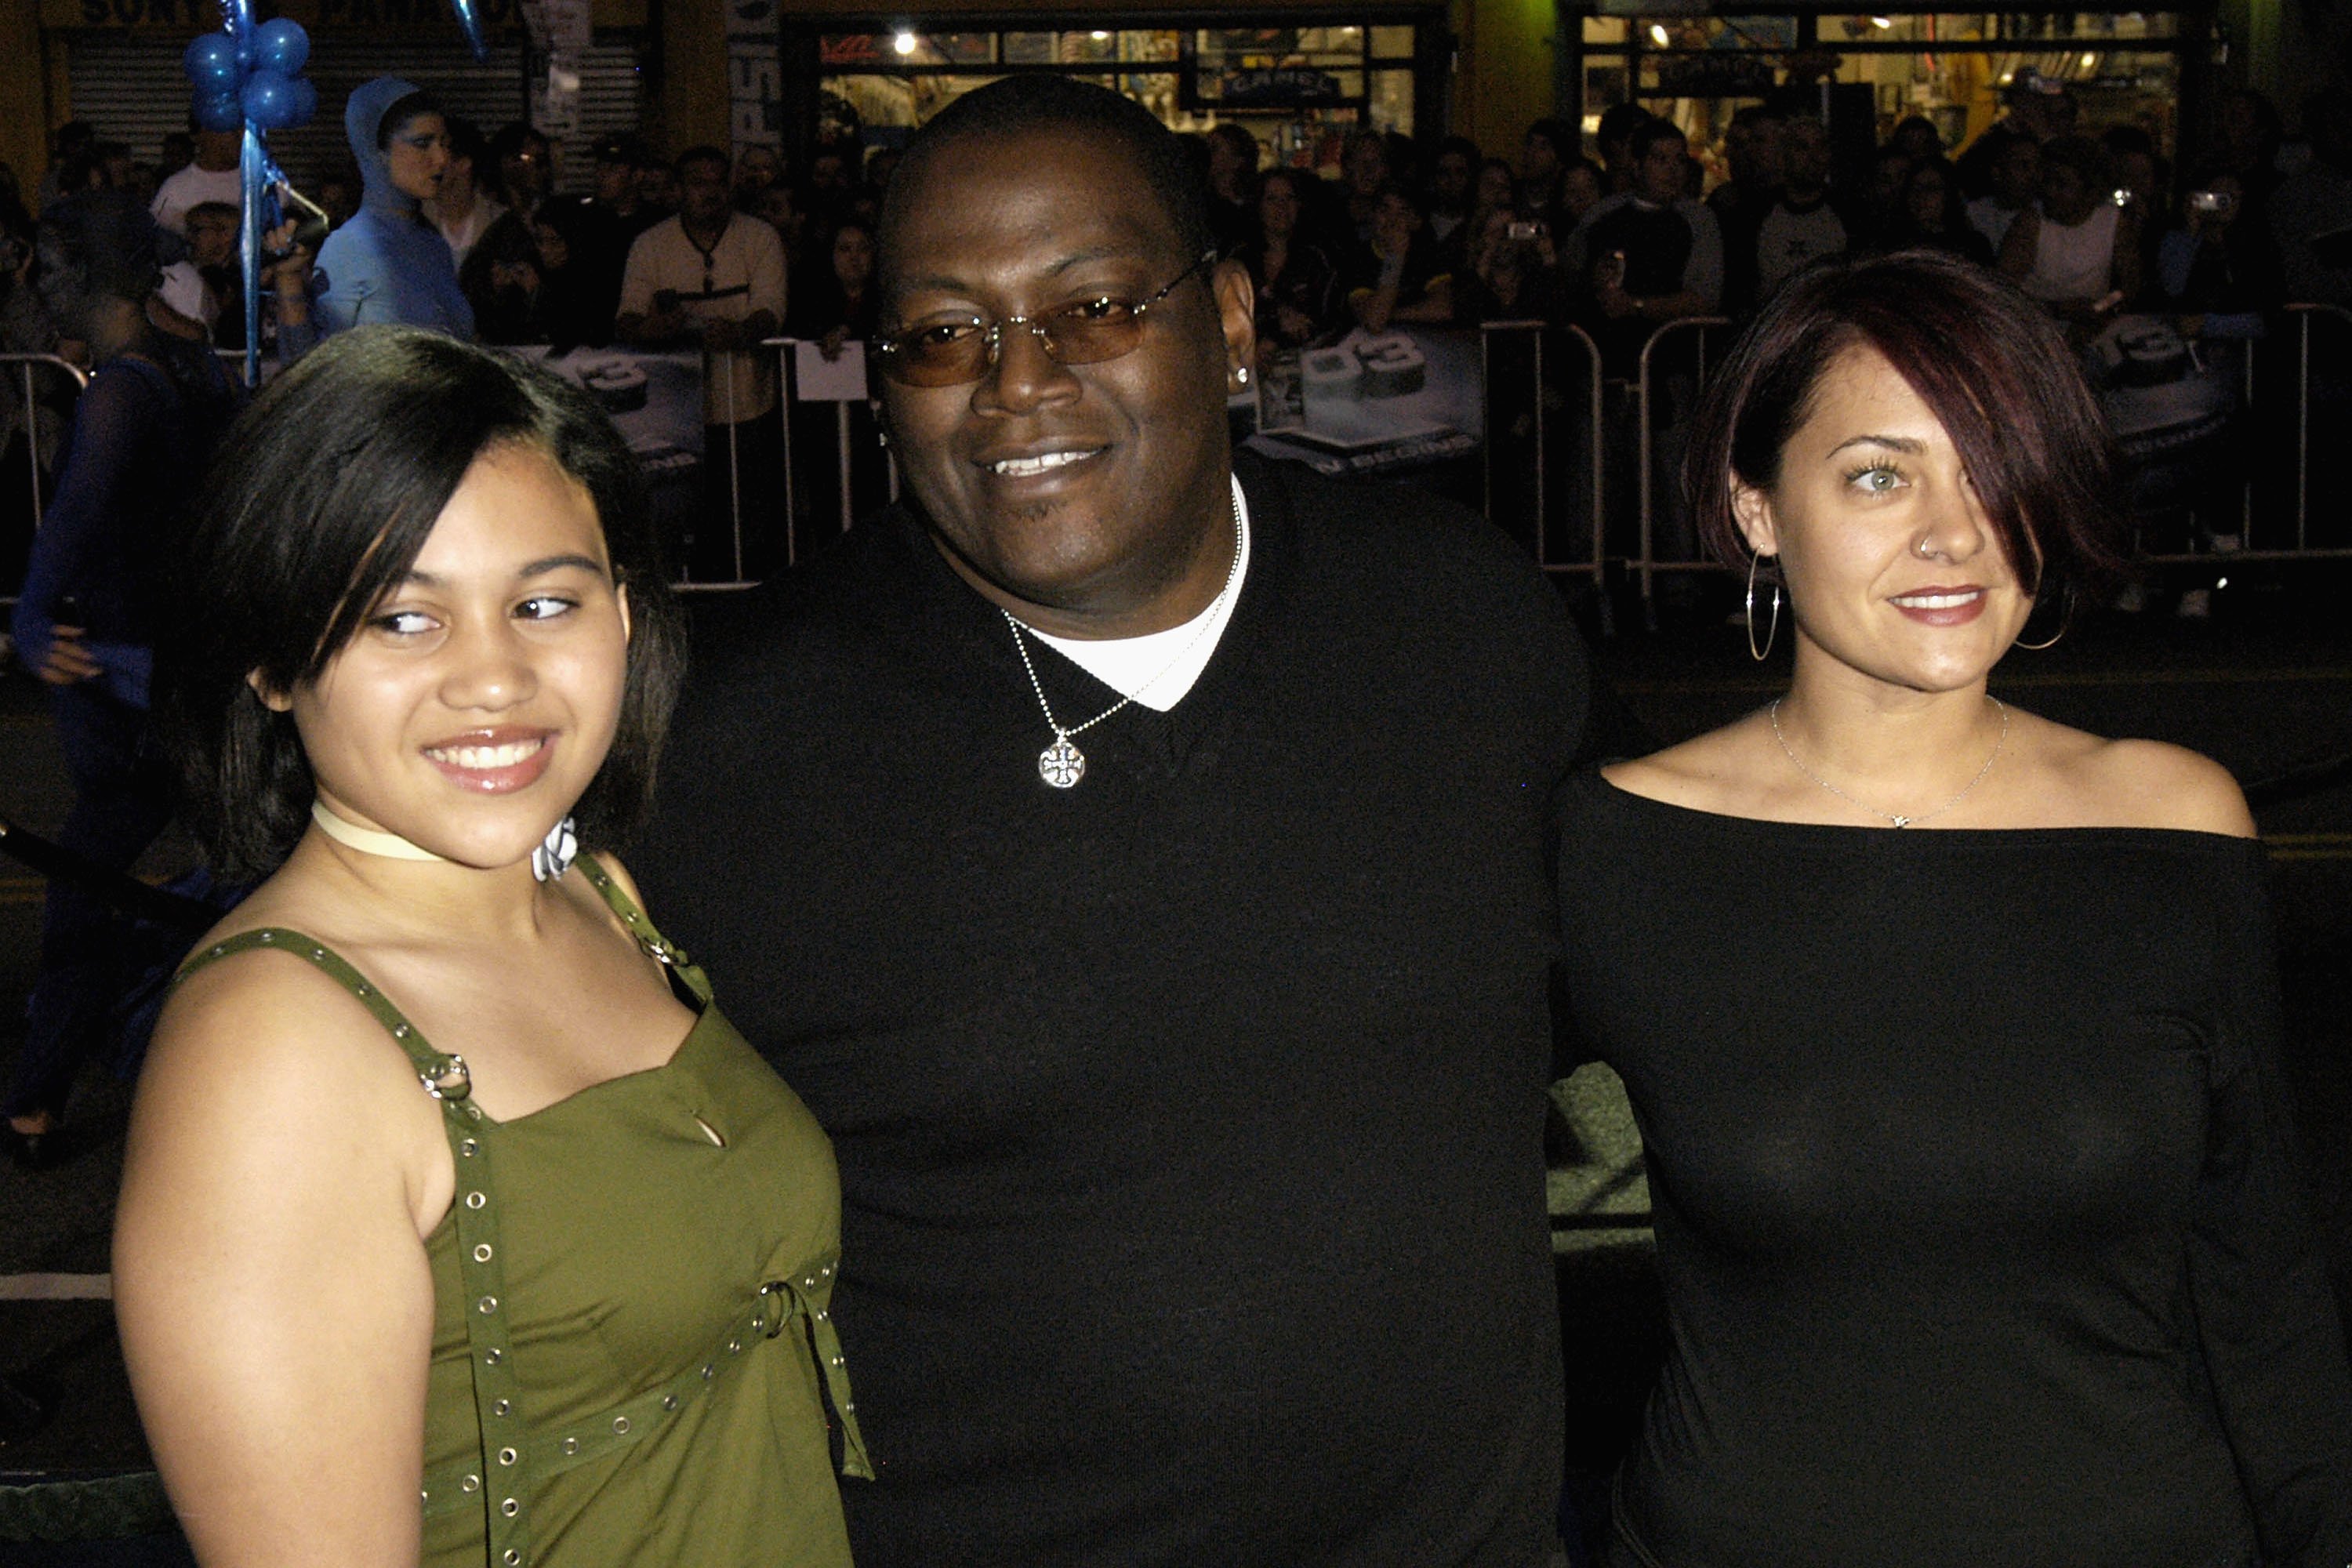 Music producer Randy Jackson arriving with Erika Riker and their daughter Zoe at the premiere of the movie "X2: X-Men United" at Grauman's Chinese Theater on April 28, 2003 in Hollywood, California. | Source: Getty Images